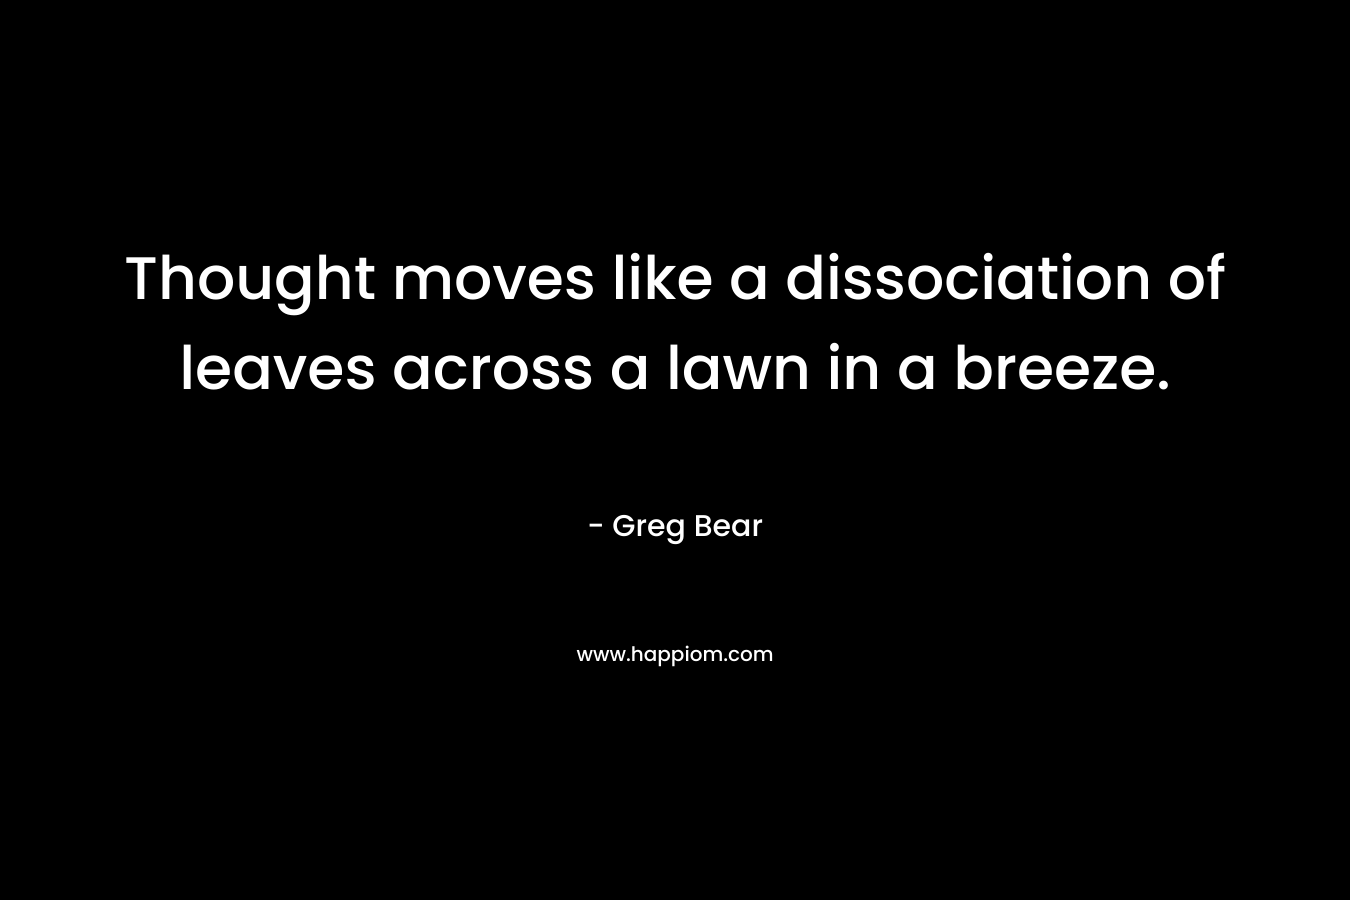 Thought moves like a dissociation of leaves across a lawn in a breeze. – Greg Bear